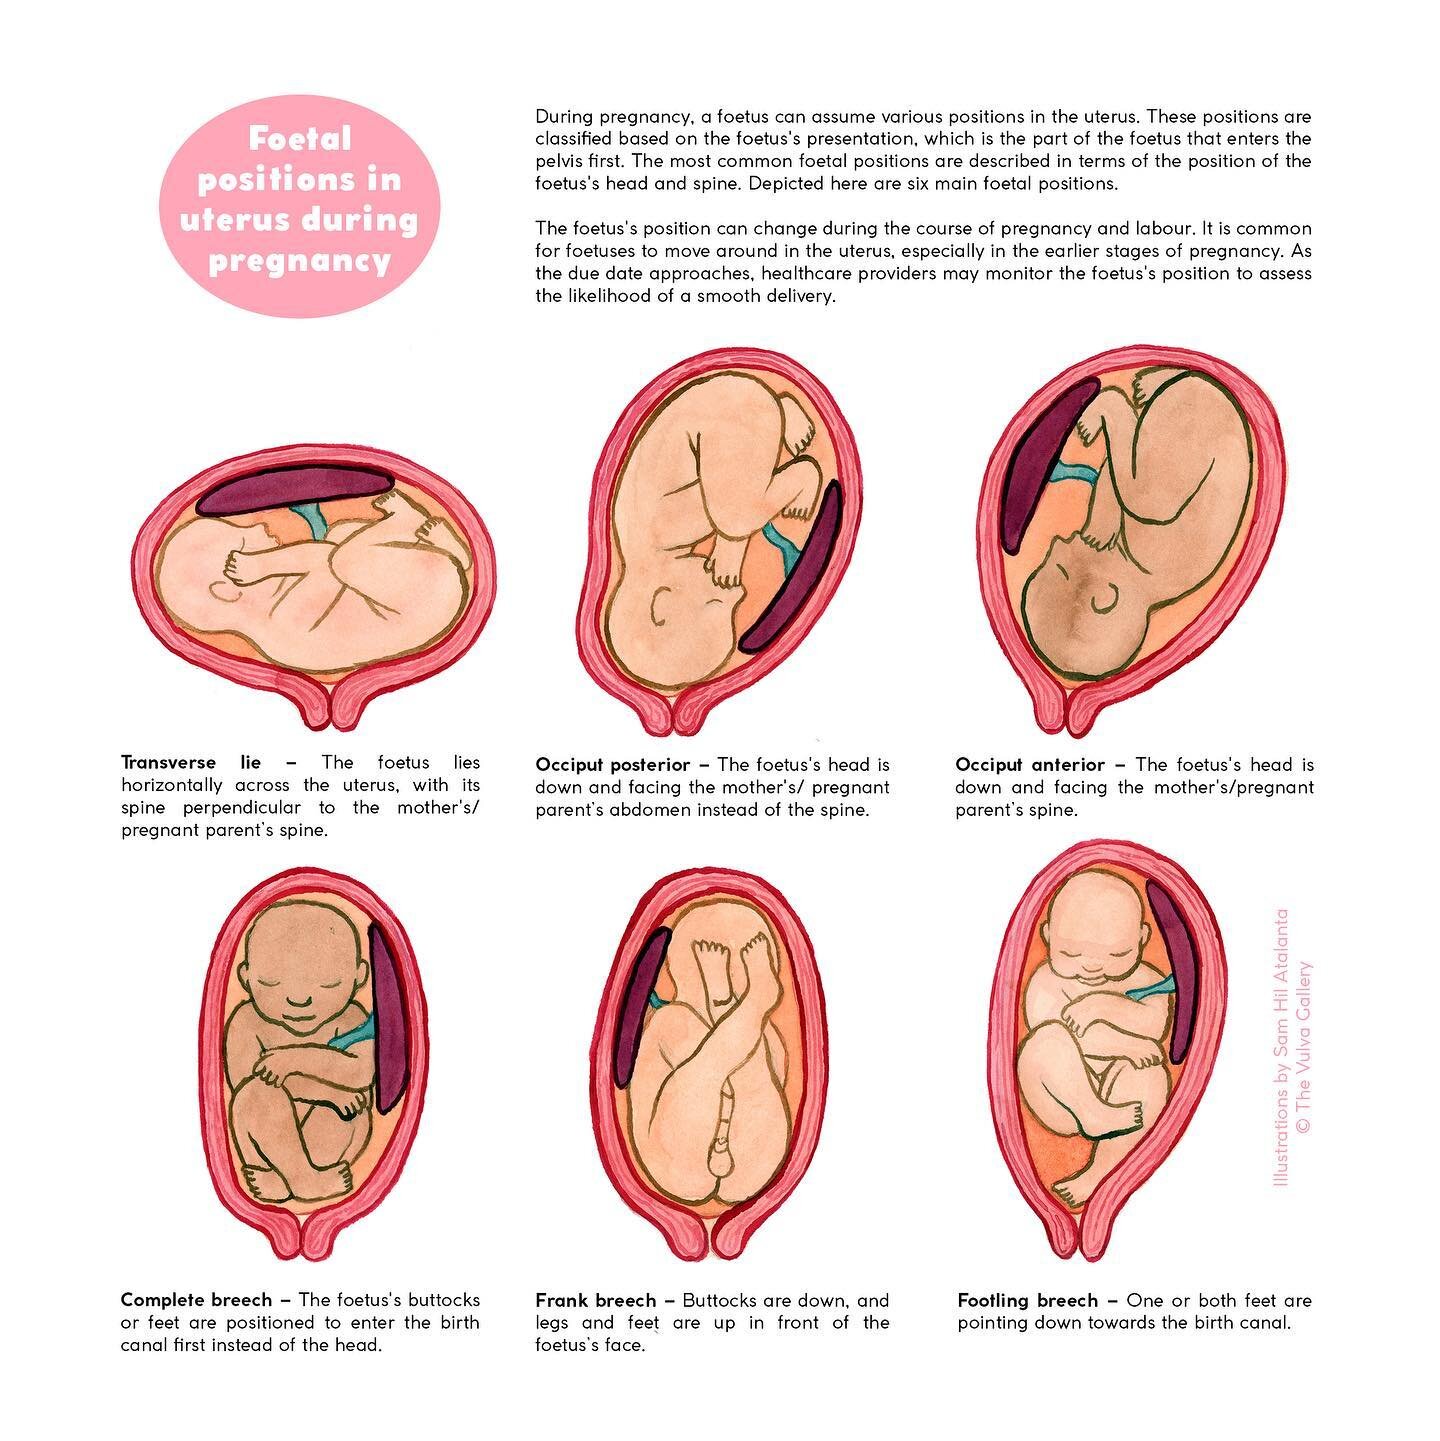 Let&rsquo;s talk about foetal positions! ✨ During pregnancy, a foetus can have all kinds of positions in the uterus. These positions are classified based on the part of the foetus that enters the pelvis first. The most common foetal positions are des